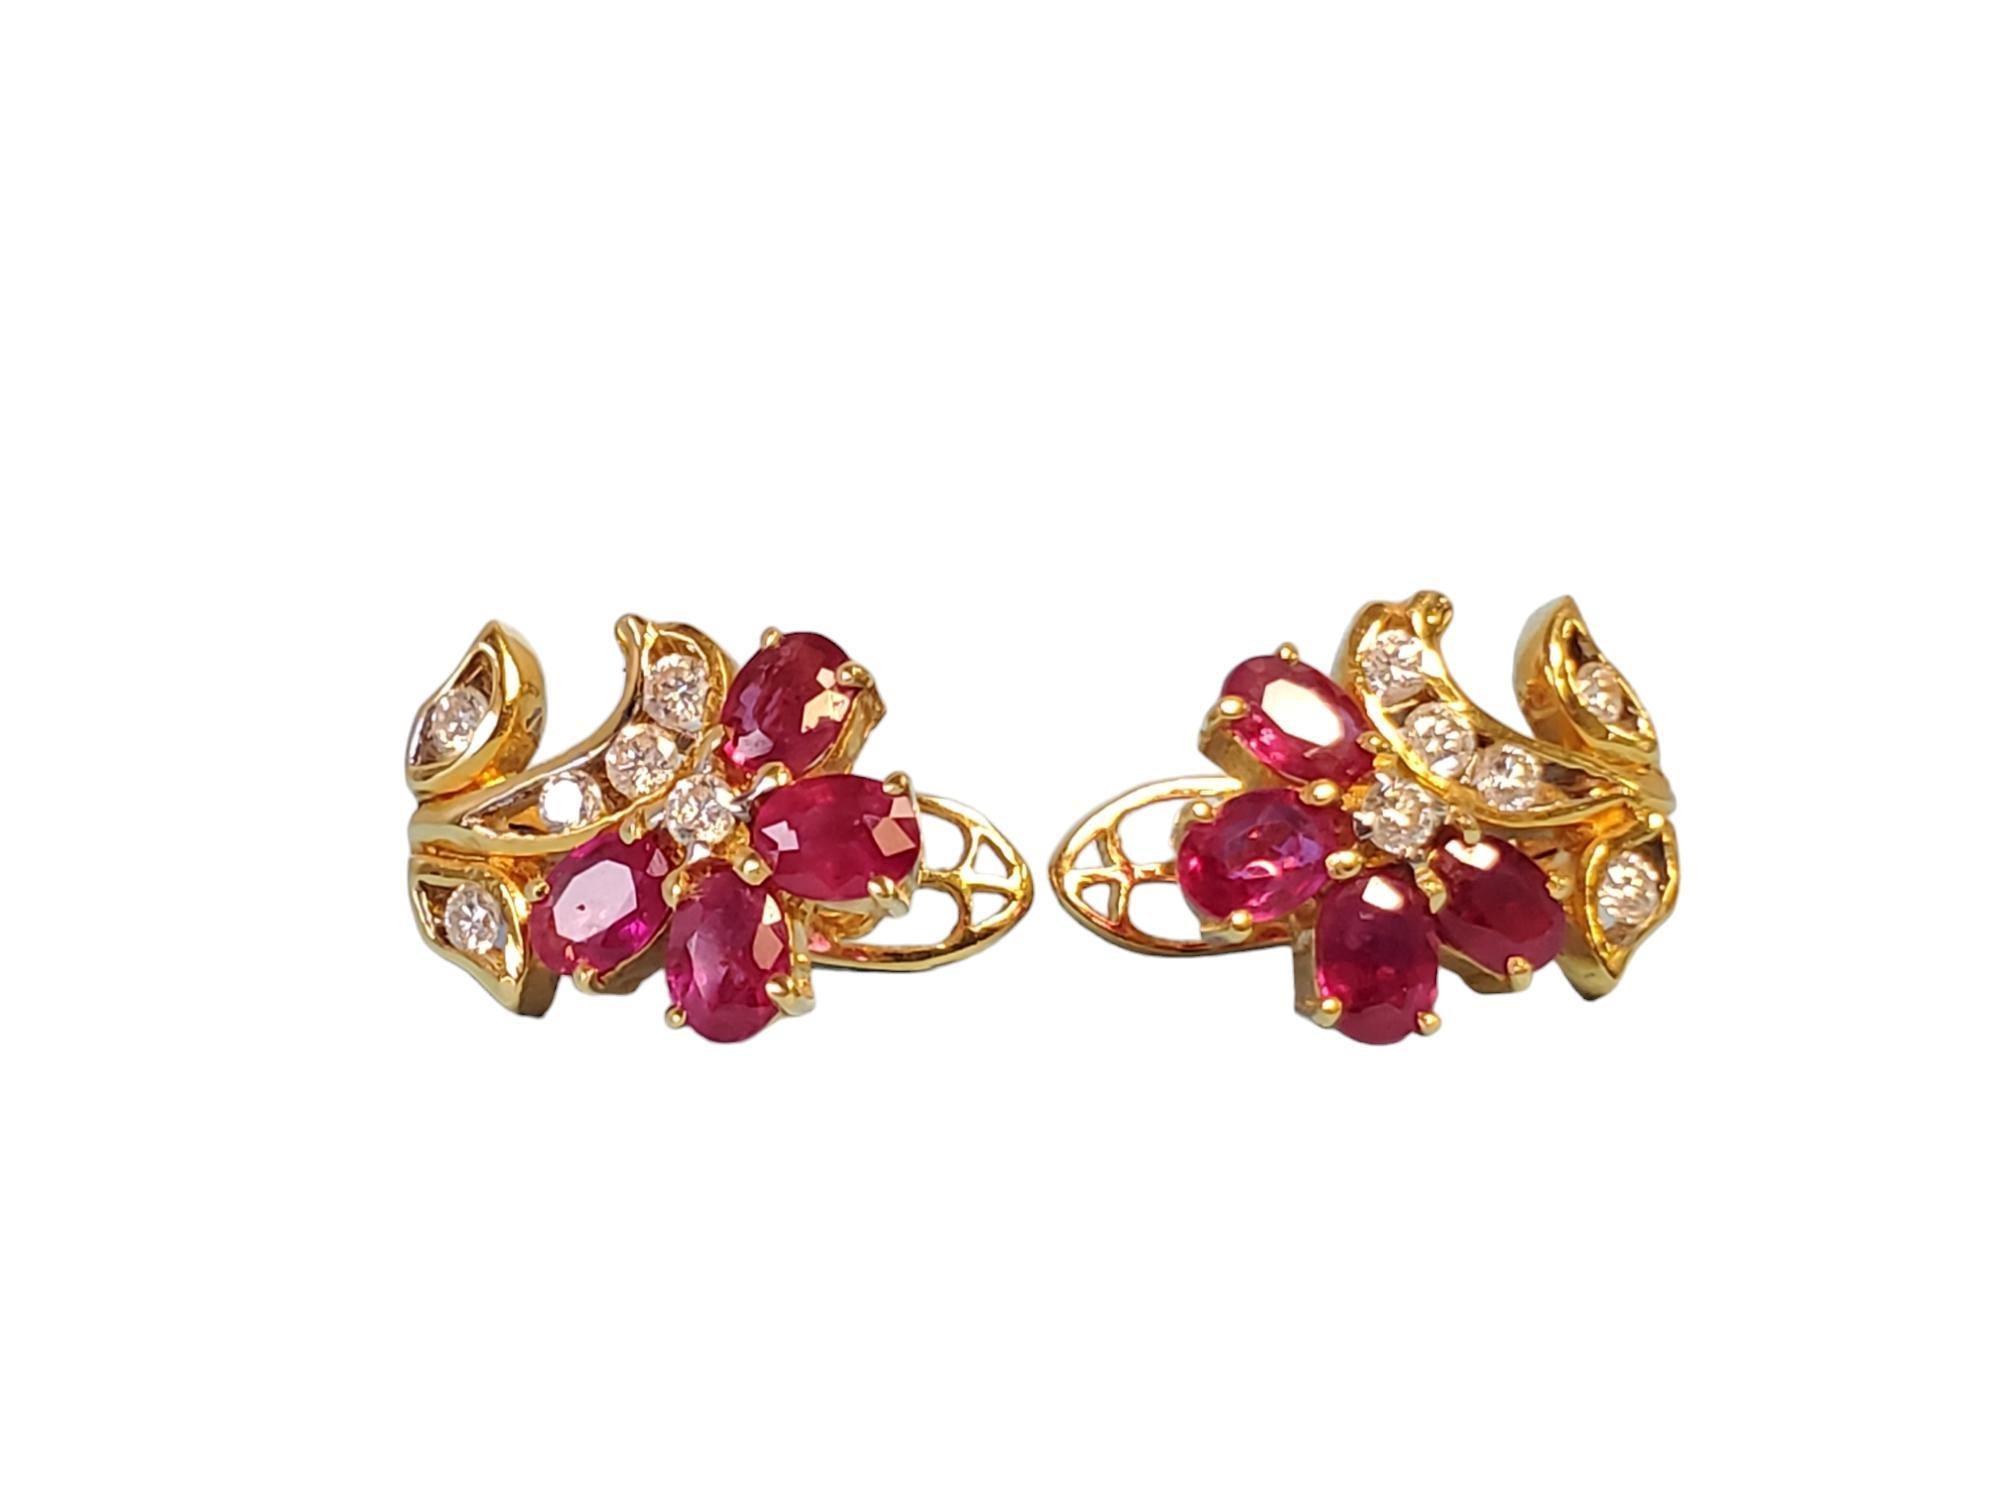 18k Yellow Gold Flower Diamond and Ruby Earrings

Listed are these amazing 18k floral diamond and ruby earrings. They feature a deep yellow gold with .26tcw FG VS round brilliant diamonds acting as the stem of the flower accompanied by 4 natural red